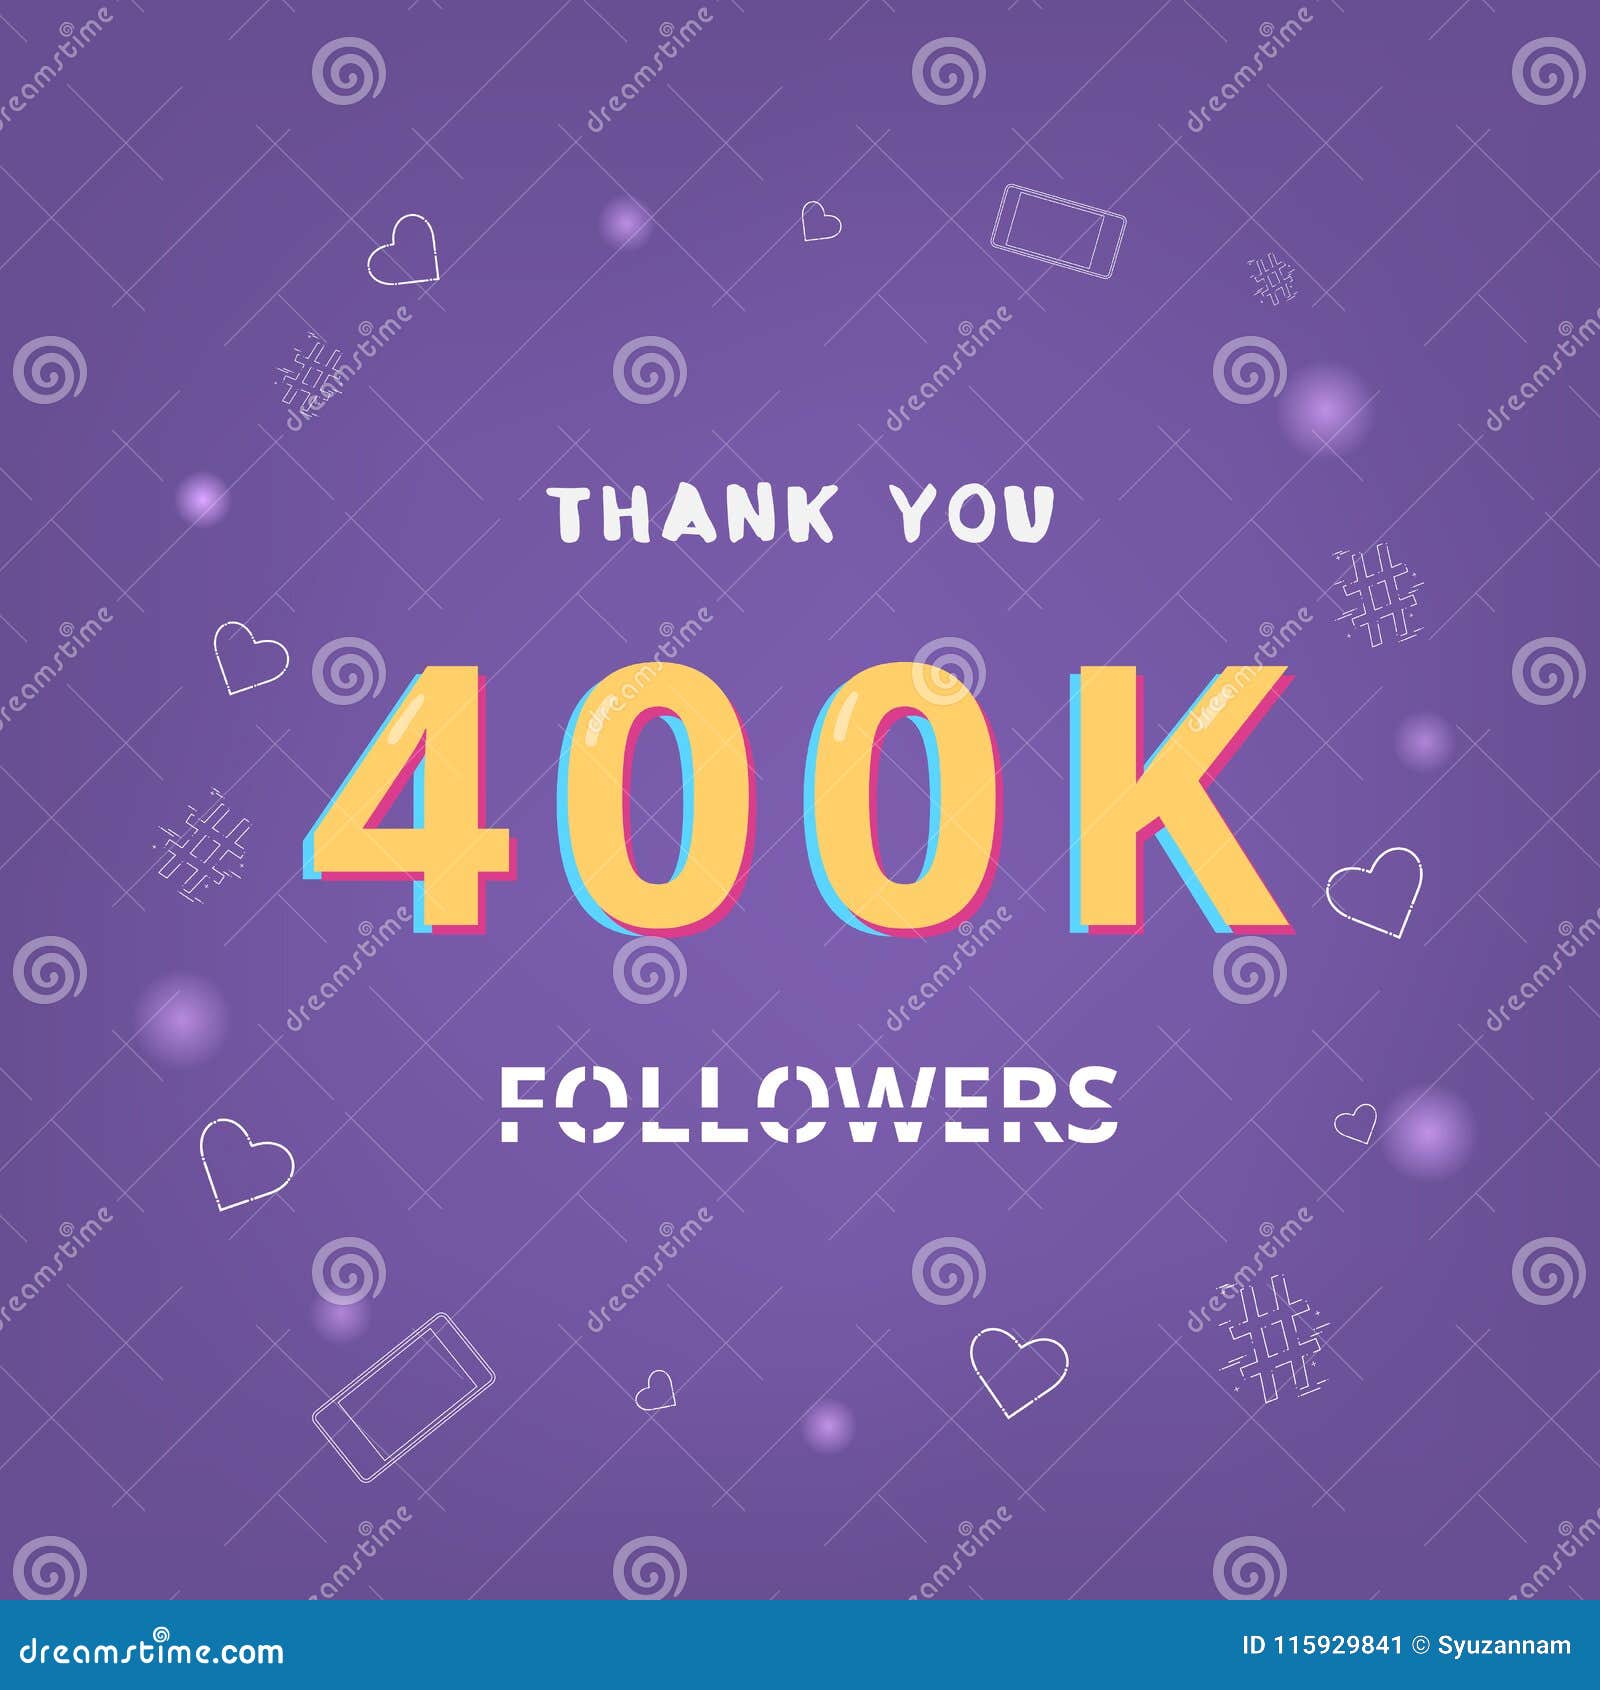 Download 2,800 Followers Thank You Stock Illustrations, Vectors & Clipa...